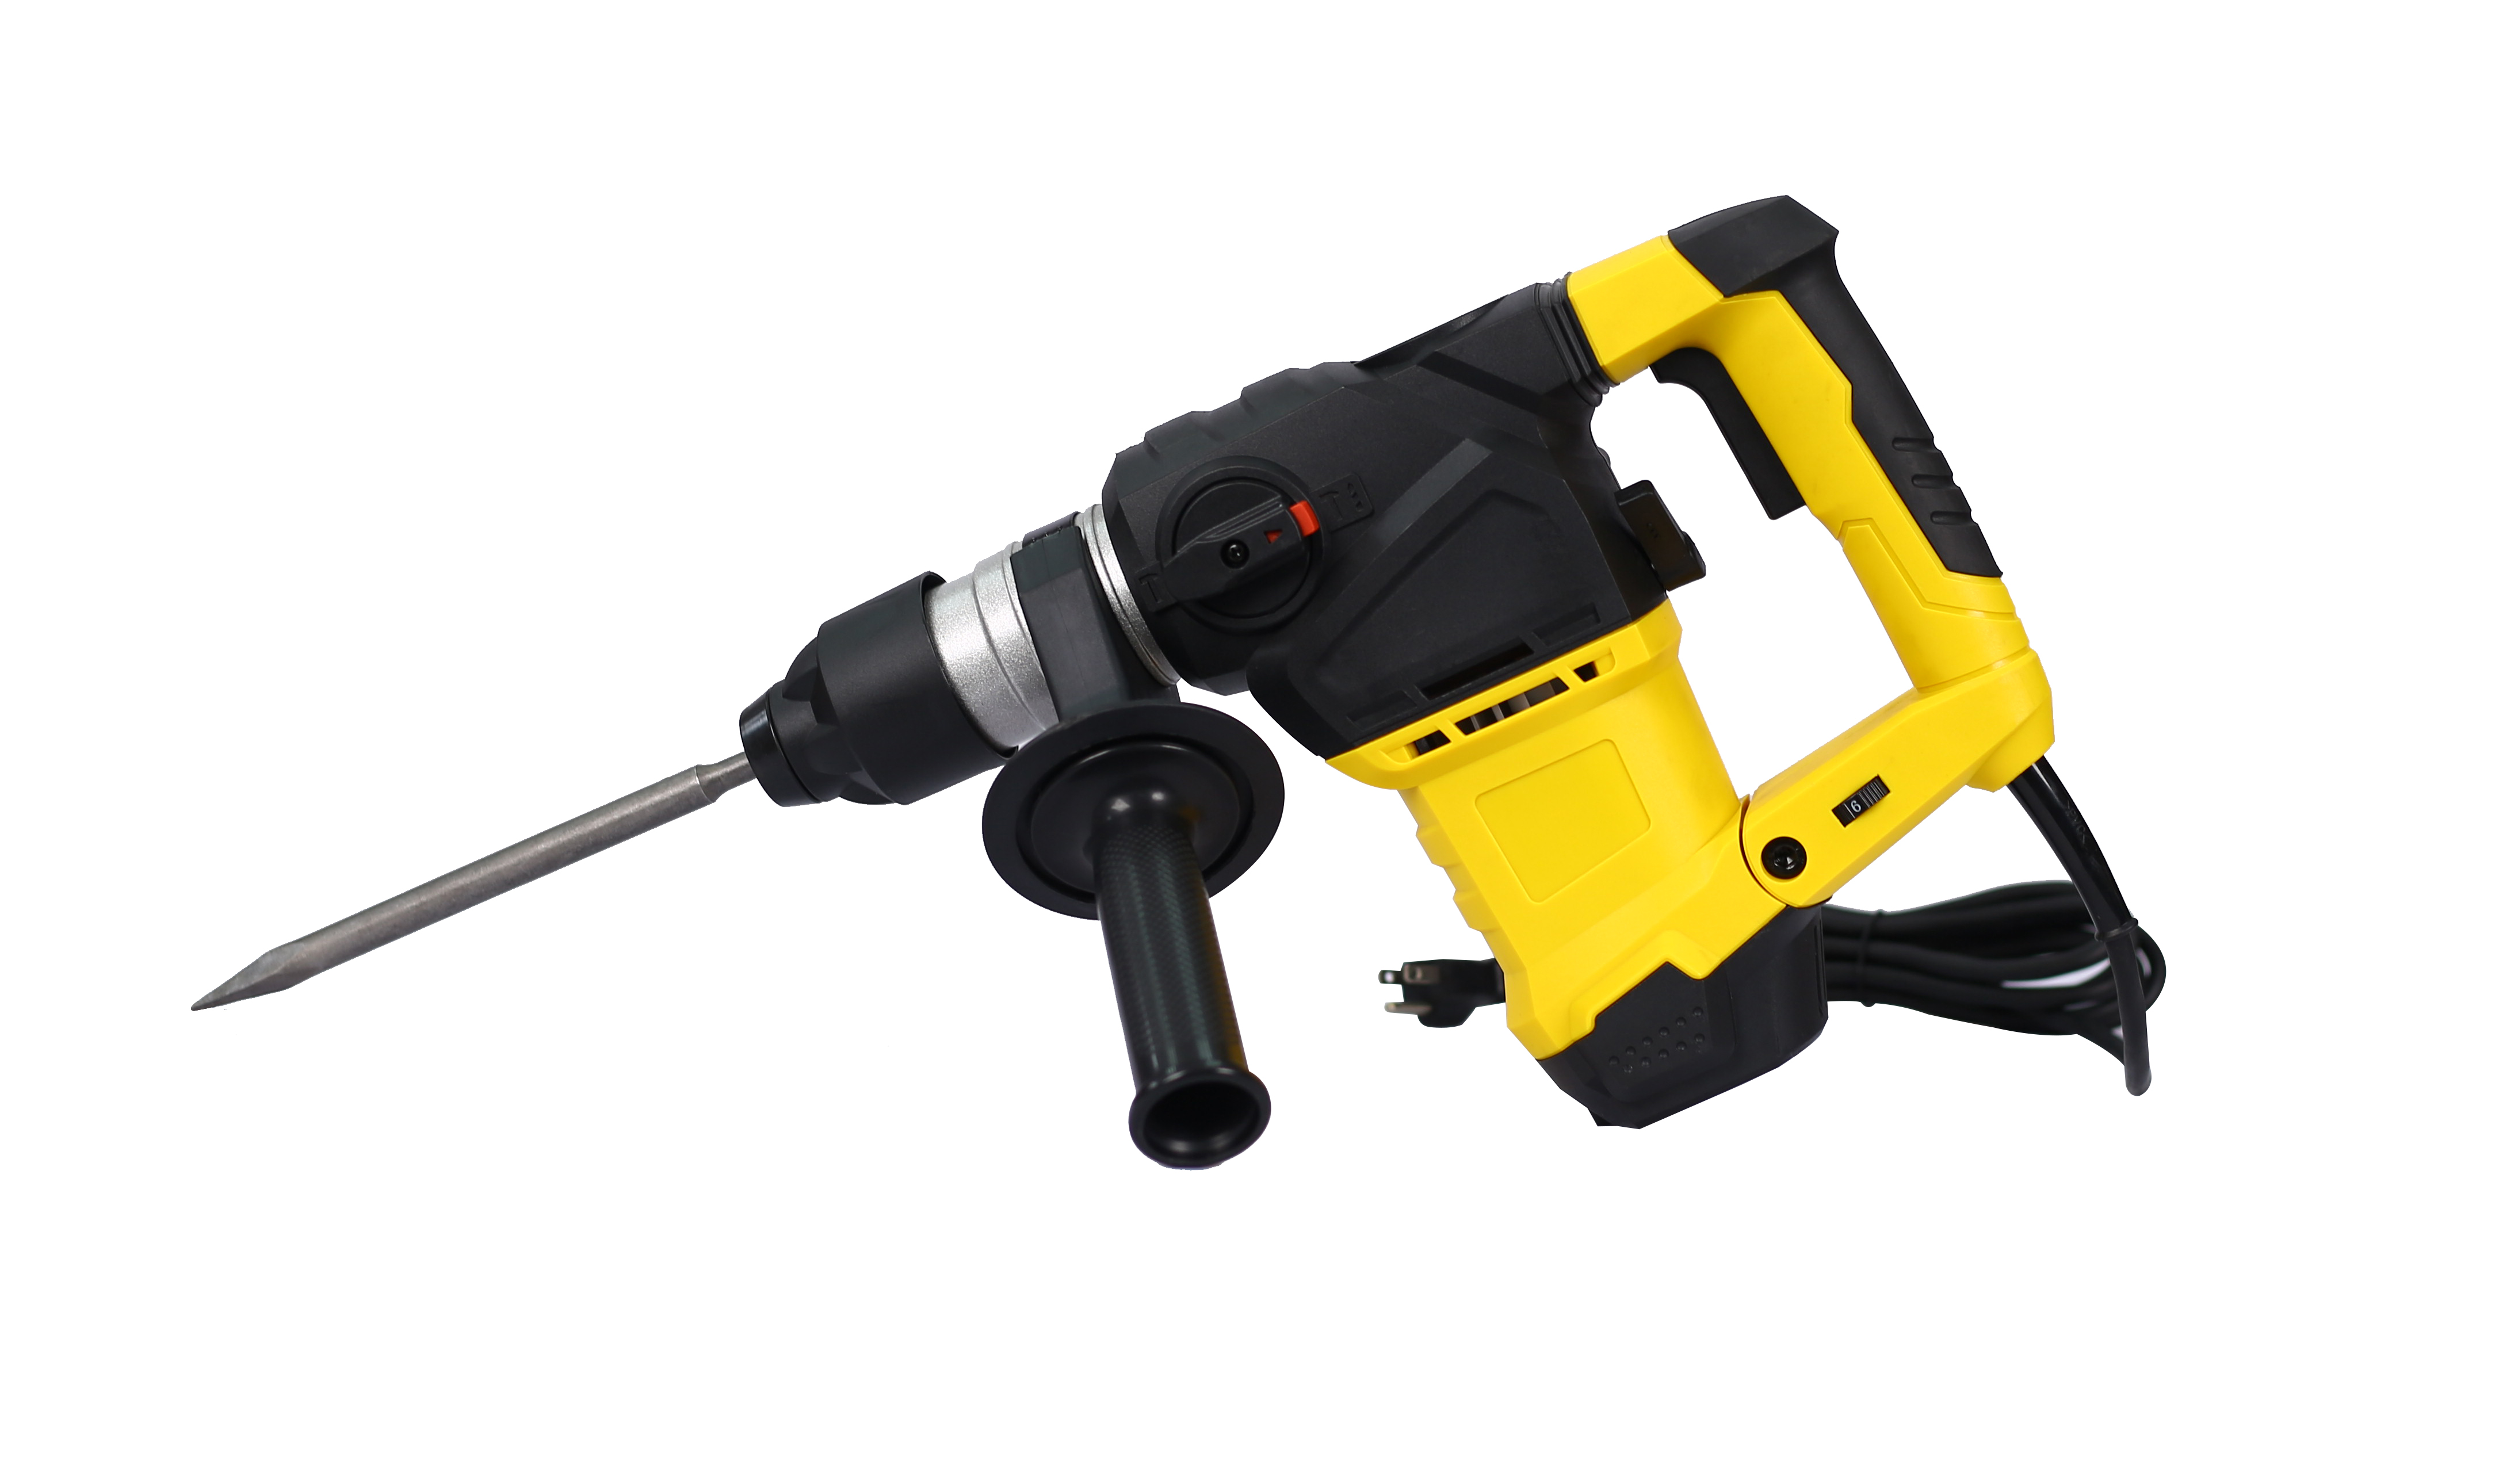 Professioinal Quality 1-1/4&rdquo; SDS-Plus Heavy Duty Rotary Hammer Drill 13 Amp - Vibration Control, 3 Functions-Boyel Living